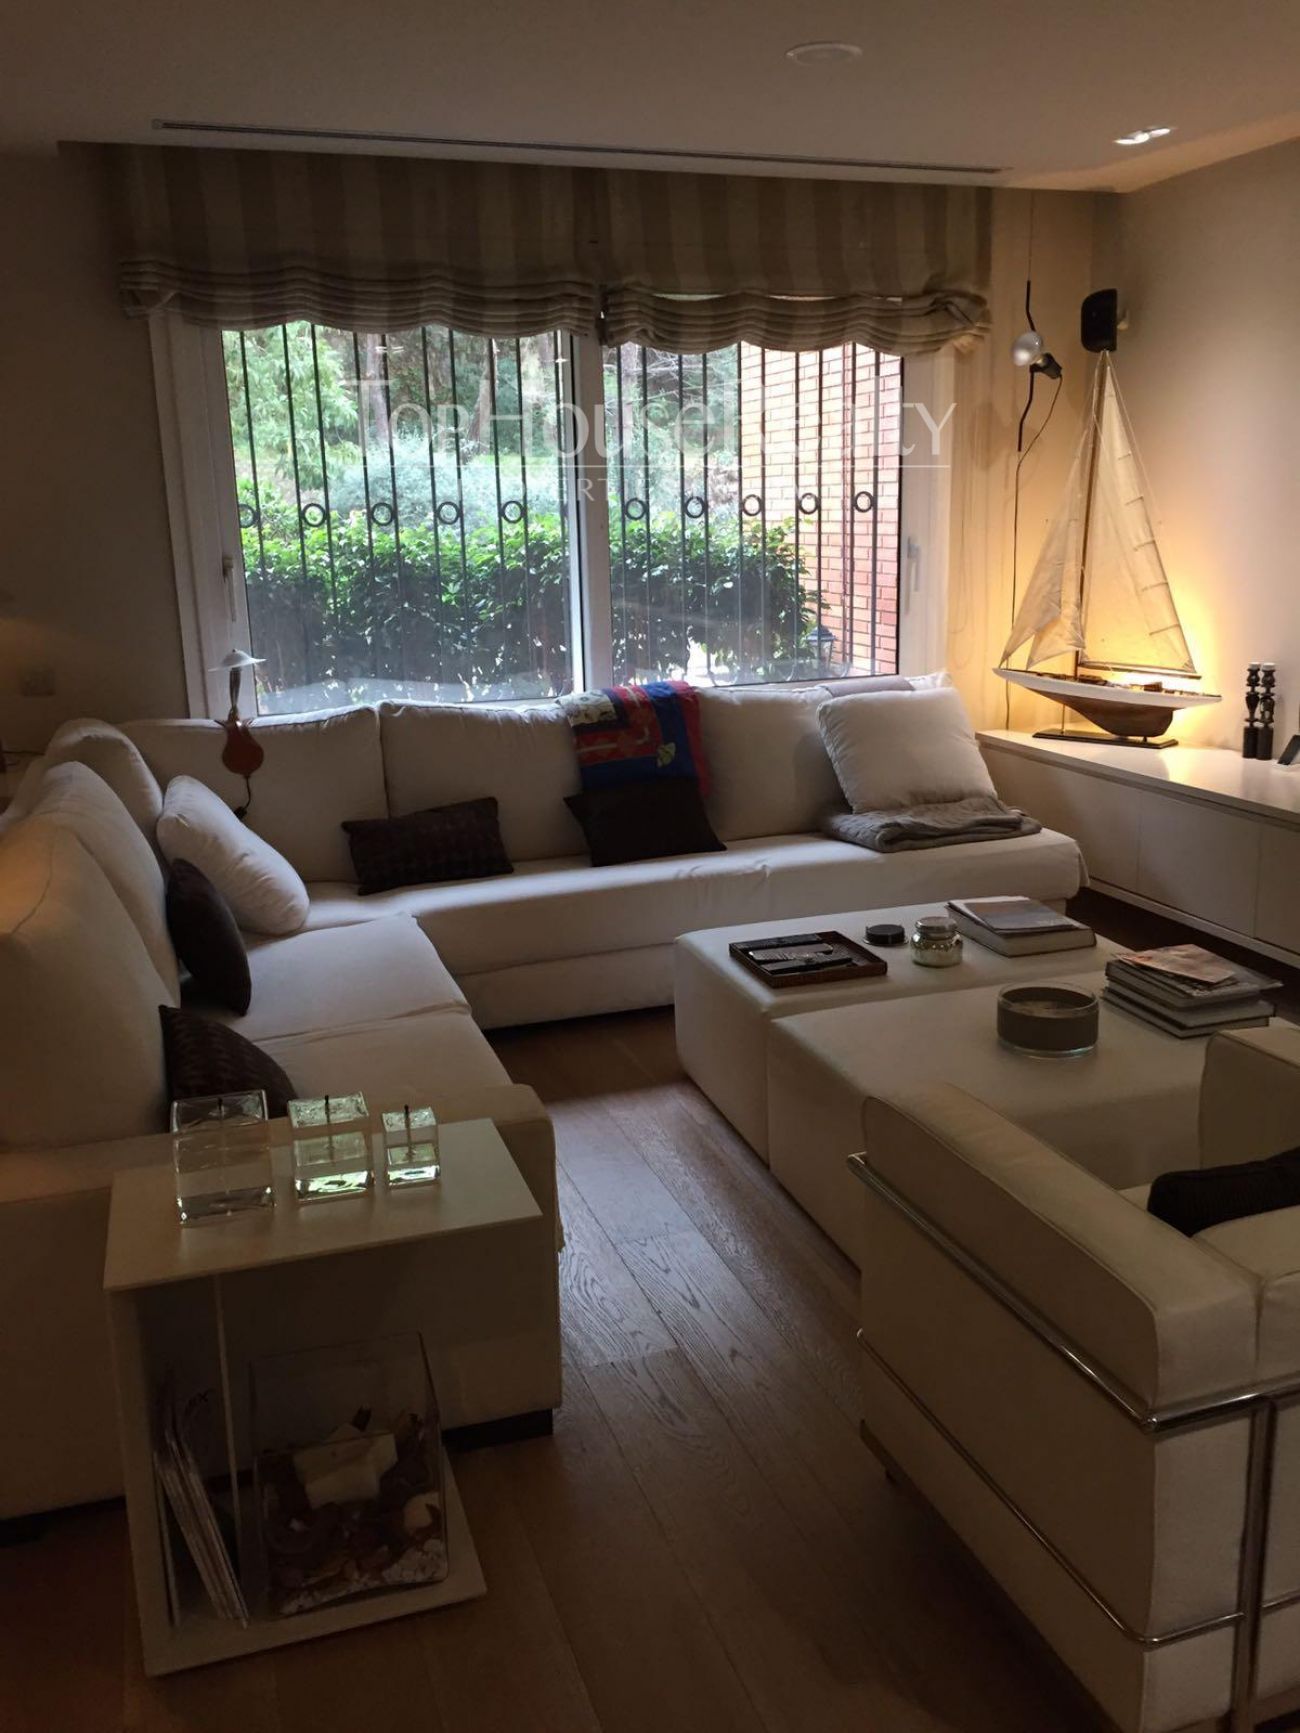 Exclusive townhouse in Putxet area of Barcelona